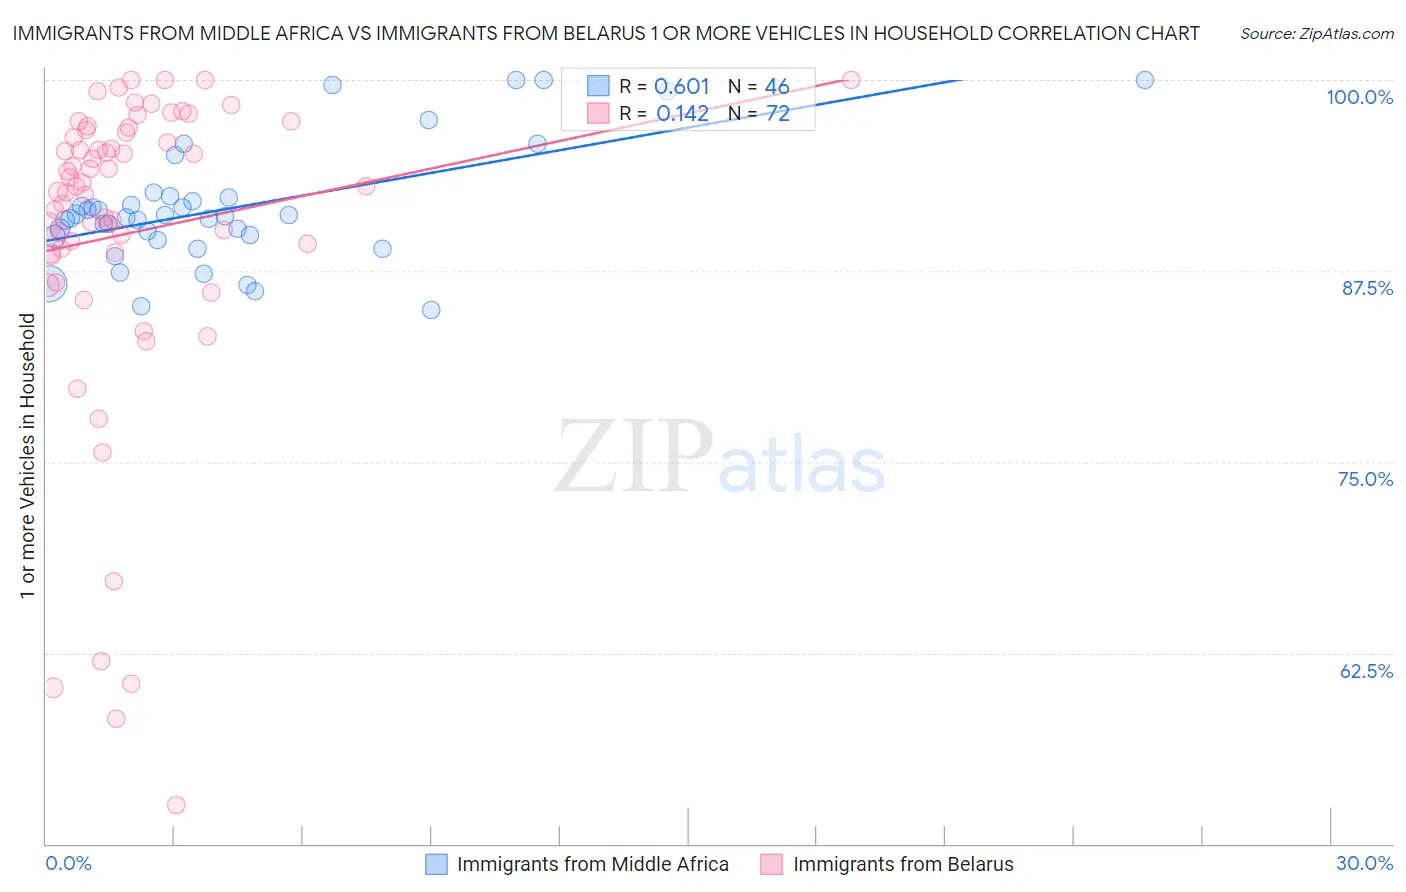 Immigrants from Middle Africa vs Immigrants from Belarus 1 or more Vehicles in Household